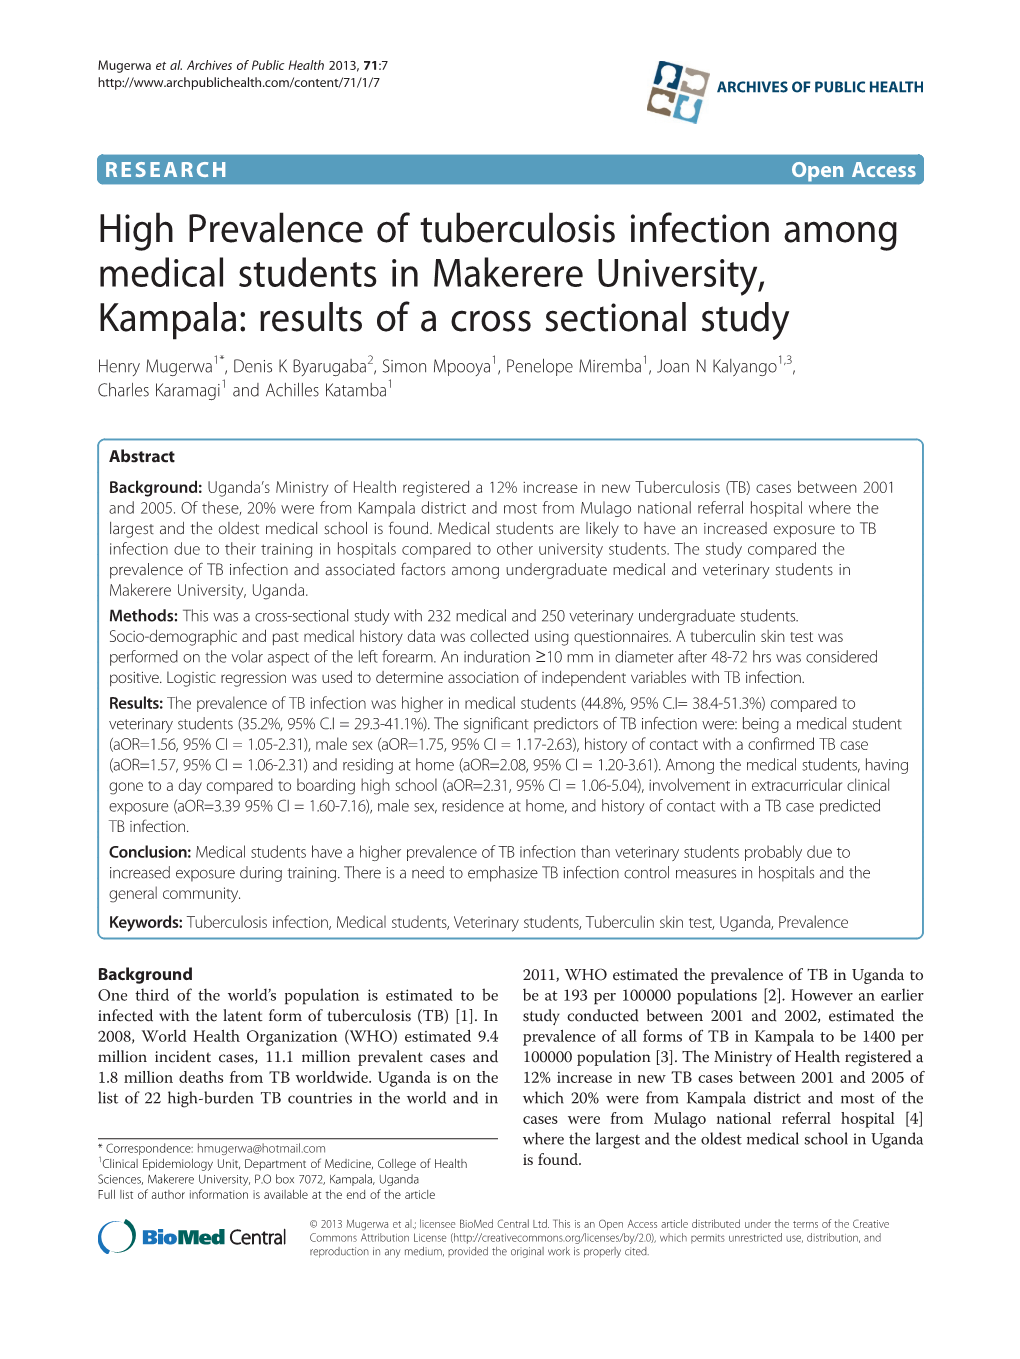 High Prevalence of Tuberculosis Infection Among Medical Students In